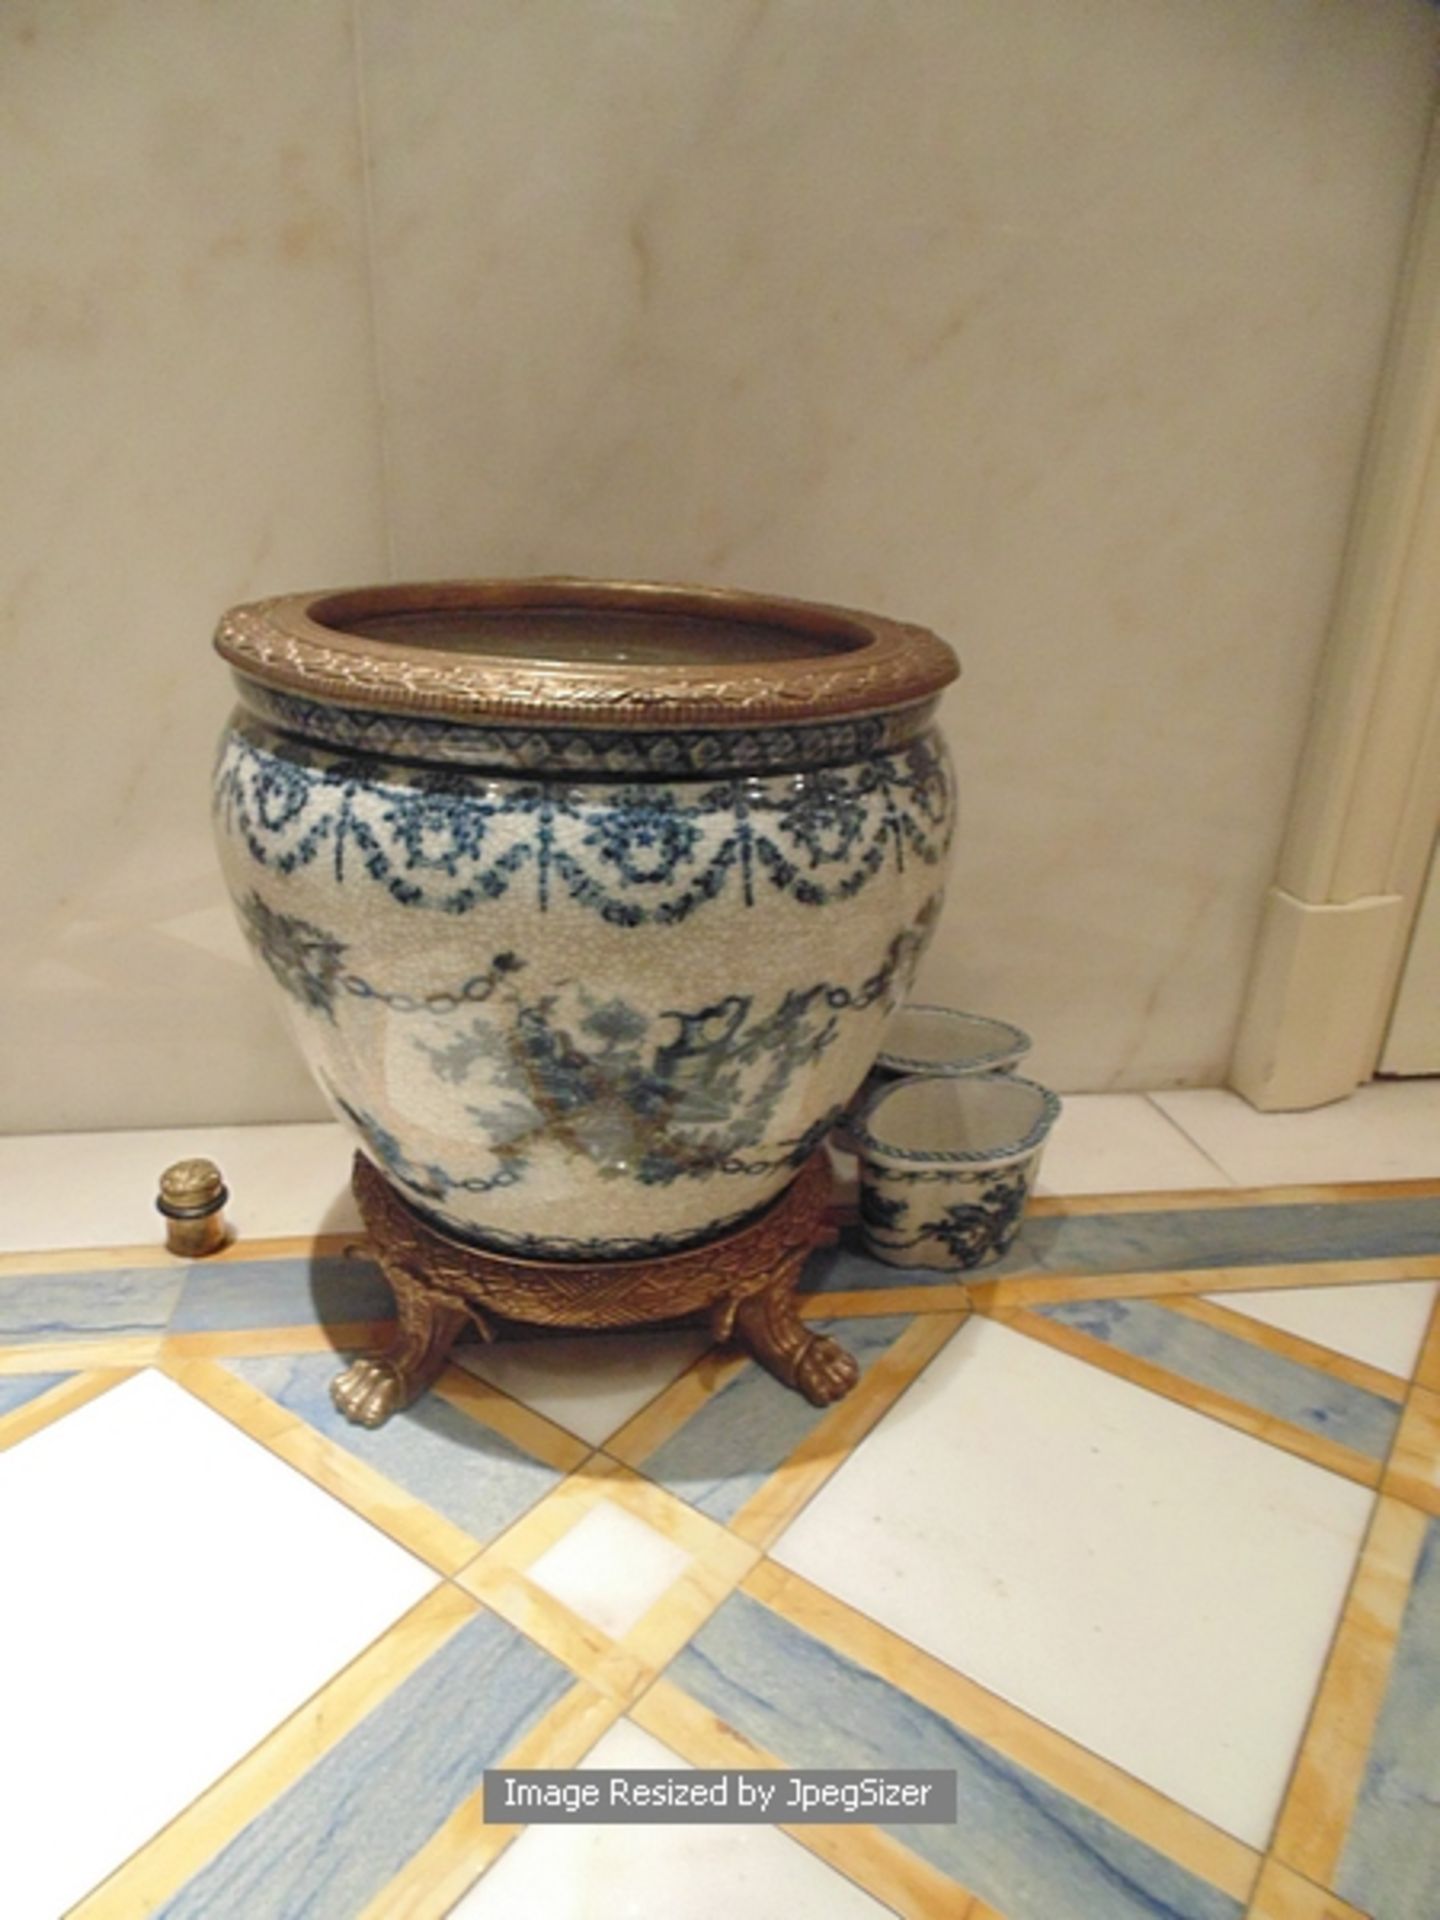 A blue and white crackleware ceramic waste paper bin with a bronze decorated top rim mounted on a